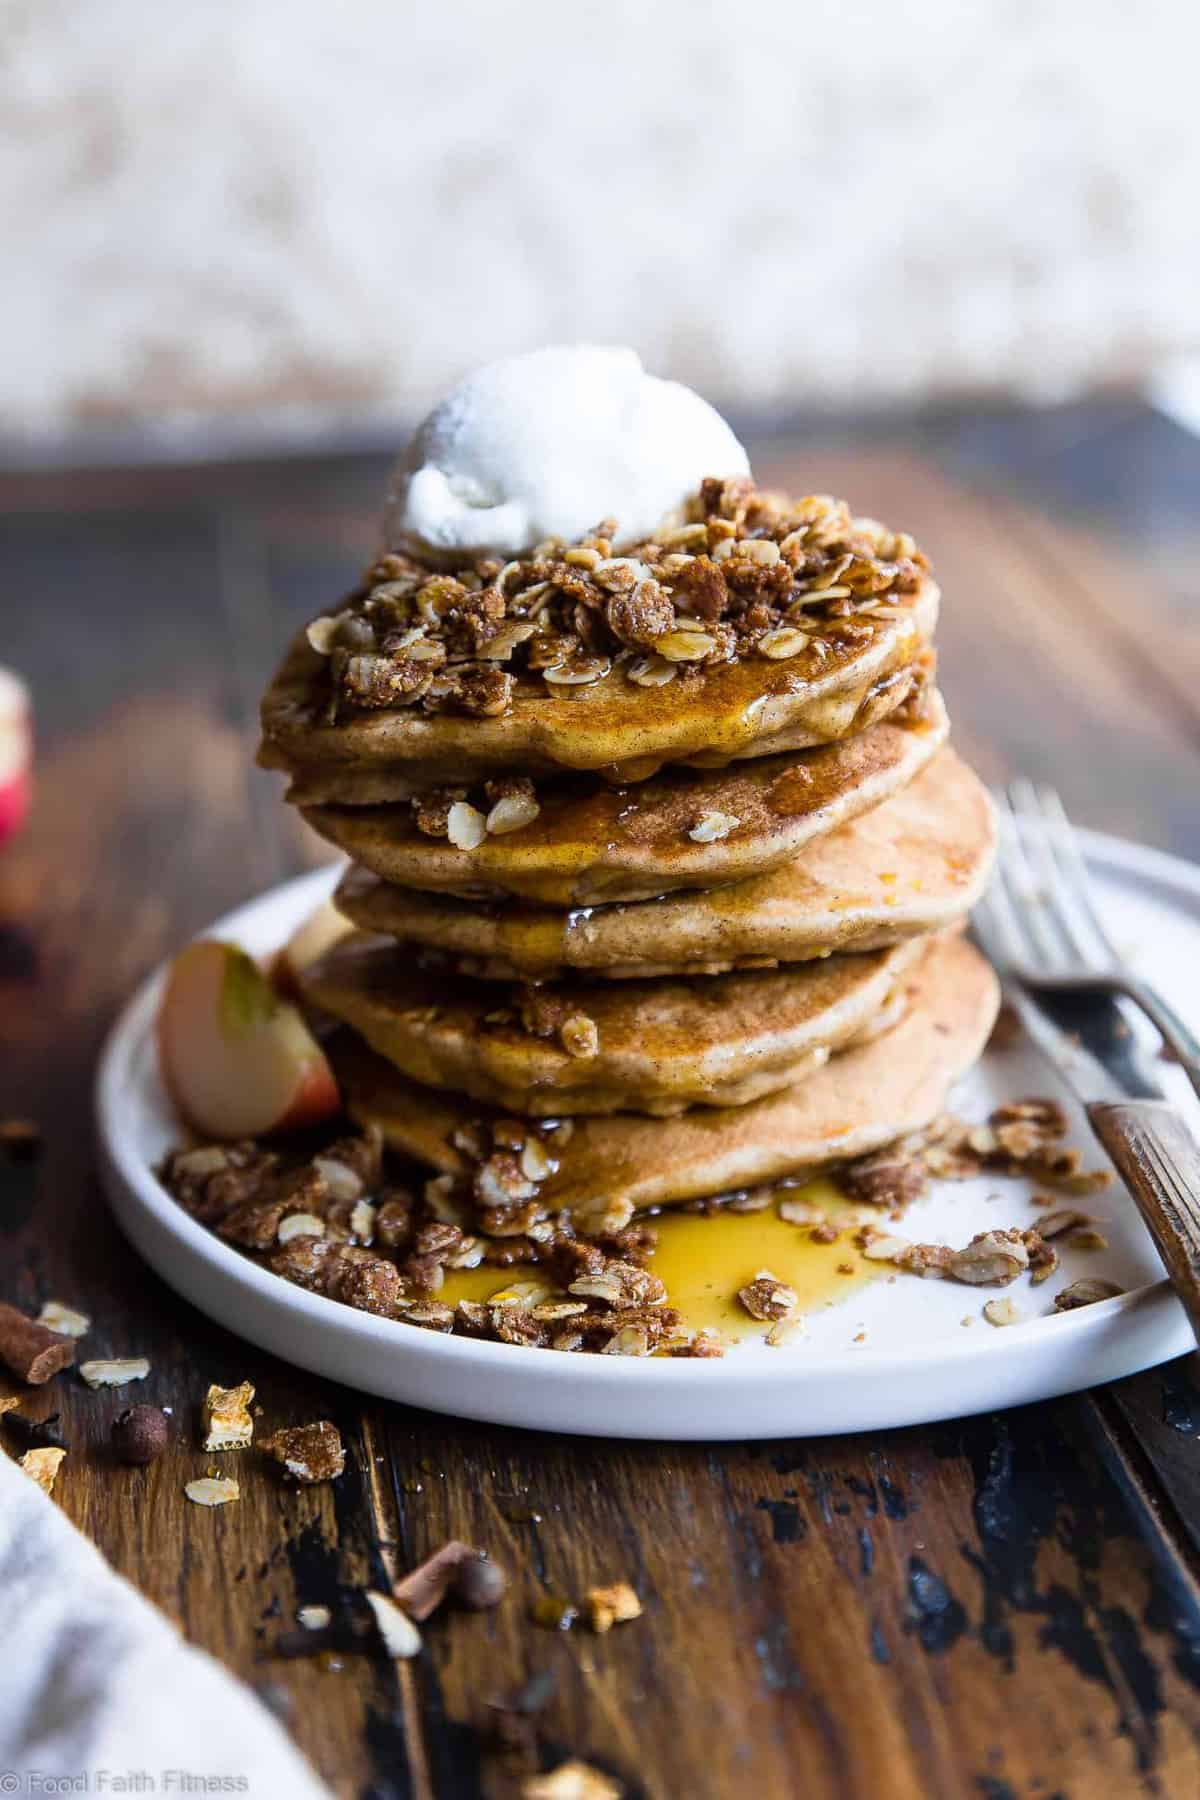 Apple Crisp Greek Yogurt Oatmeal Protein Pancakes - These Healthy Protein Pancakes with oats and Greek Yogurt taste like having apple crisp for breakfast! Gluten free, made from simple, wholesome ingredients and SO thick and fluffy! | #Foodfaithfitness | #Glutenfree #Dairyfree #Greekyogurt #Healthy #Pancakes